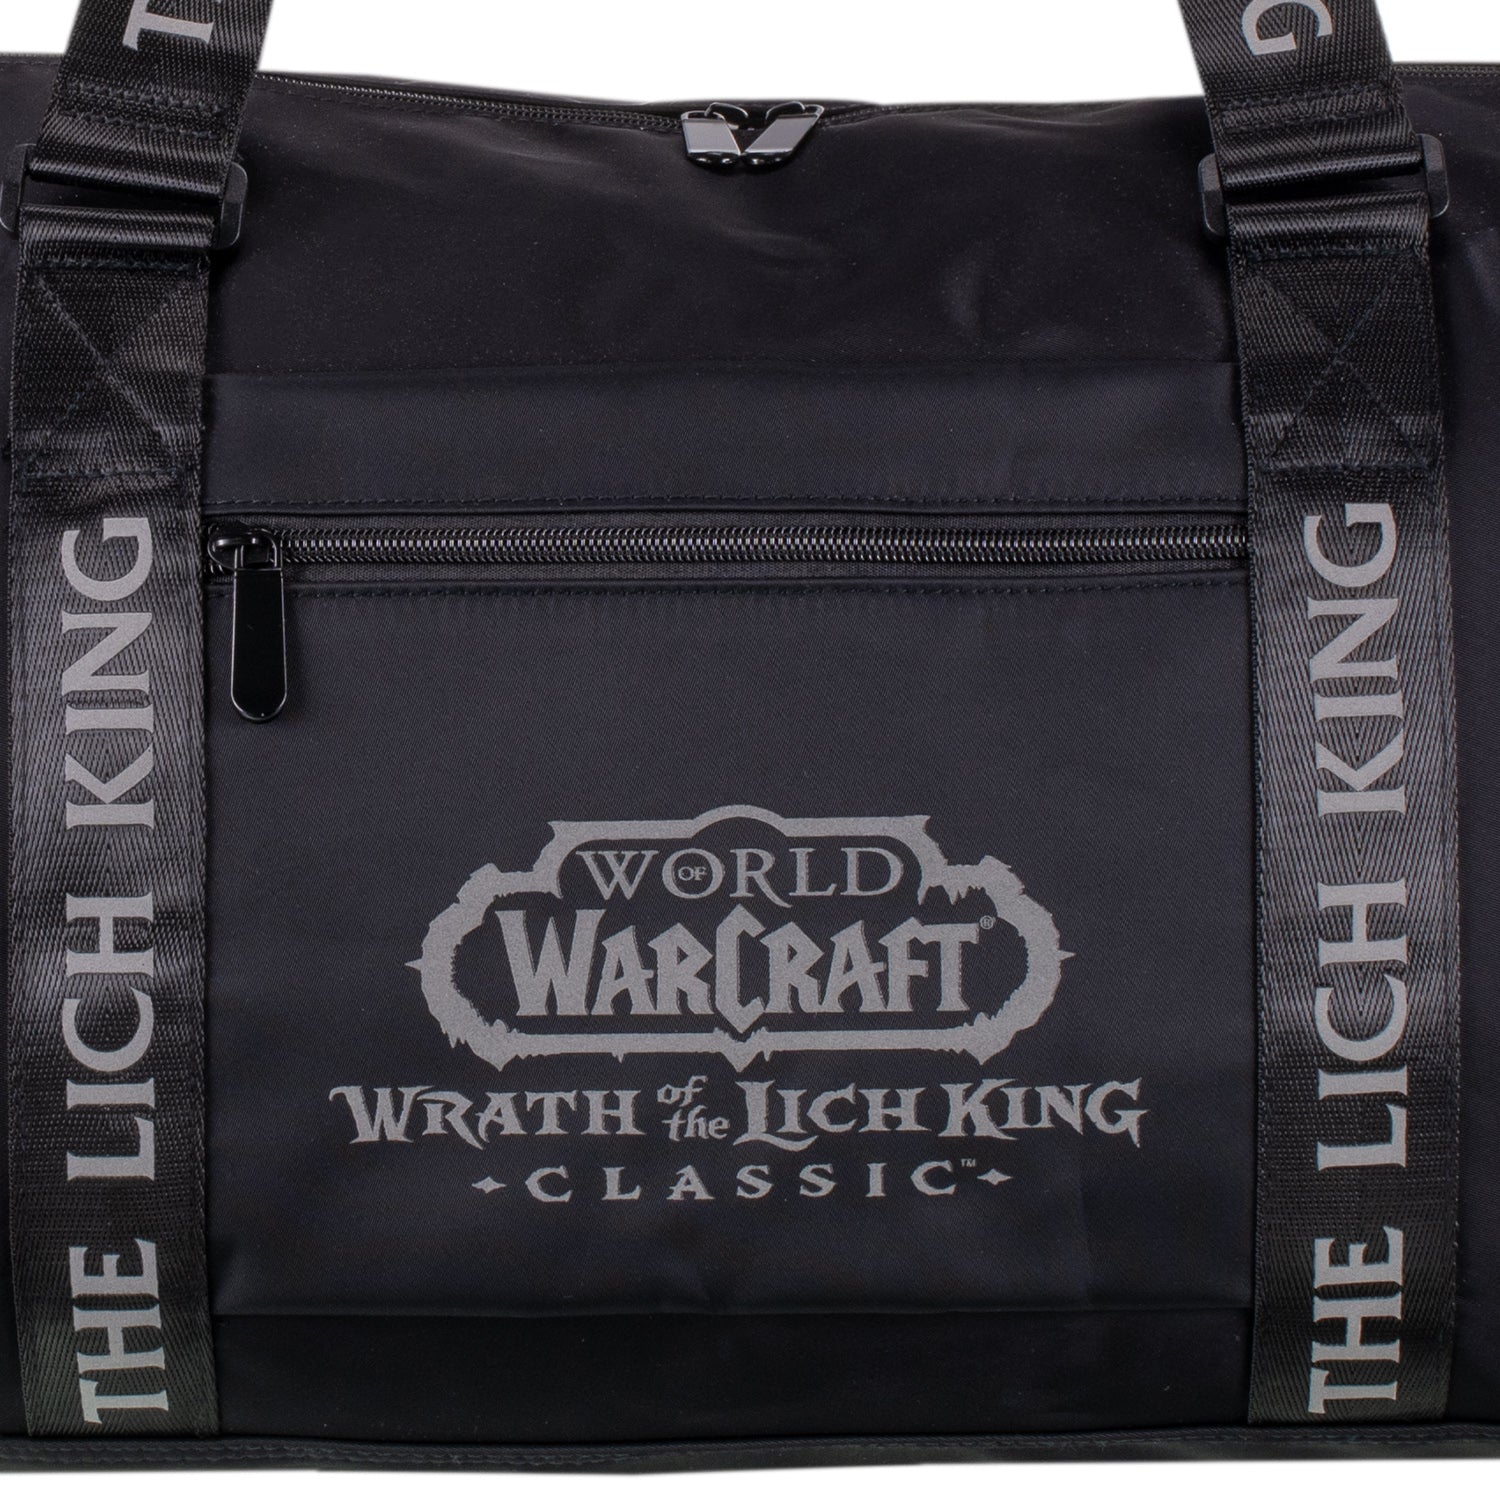 World of Warcraft Wrath of the Lich King Duffle Bag - Close Up View